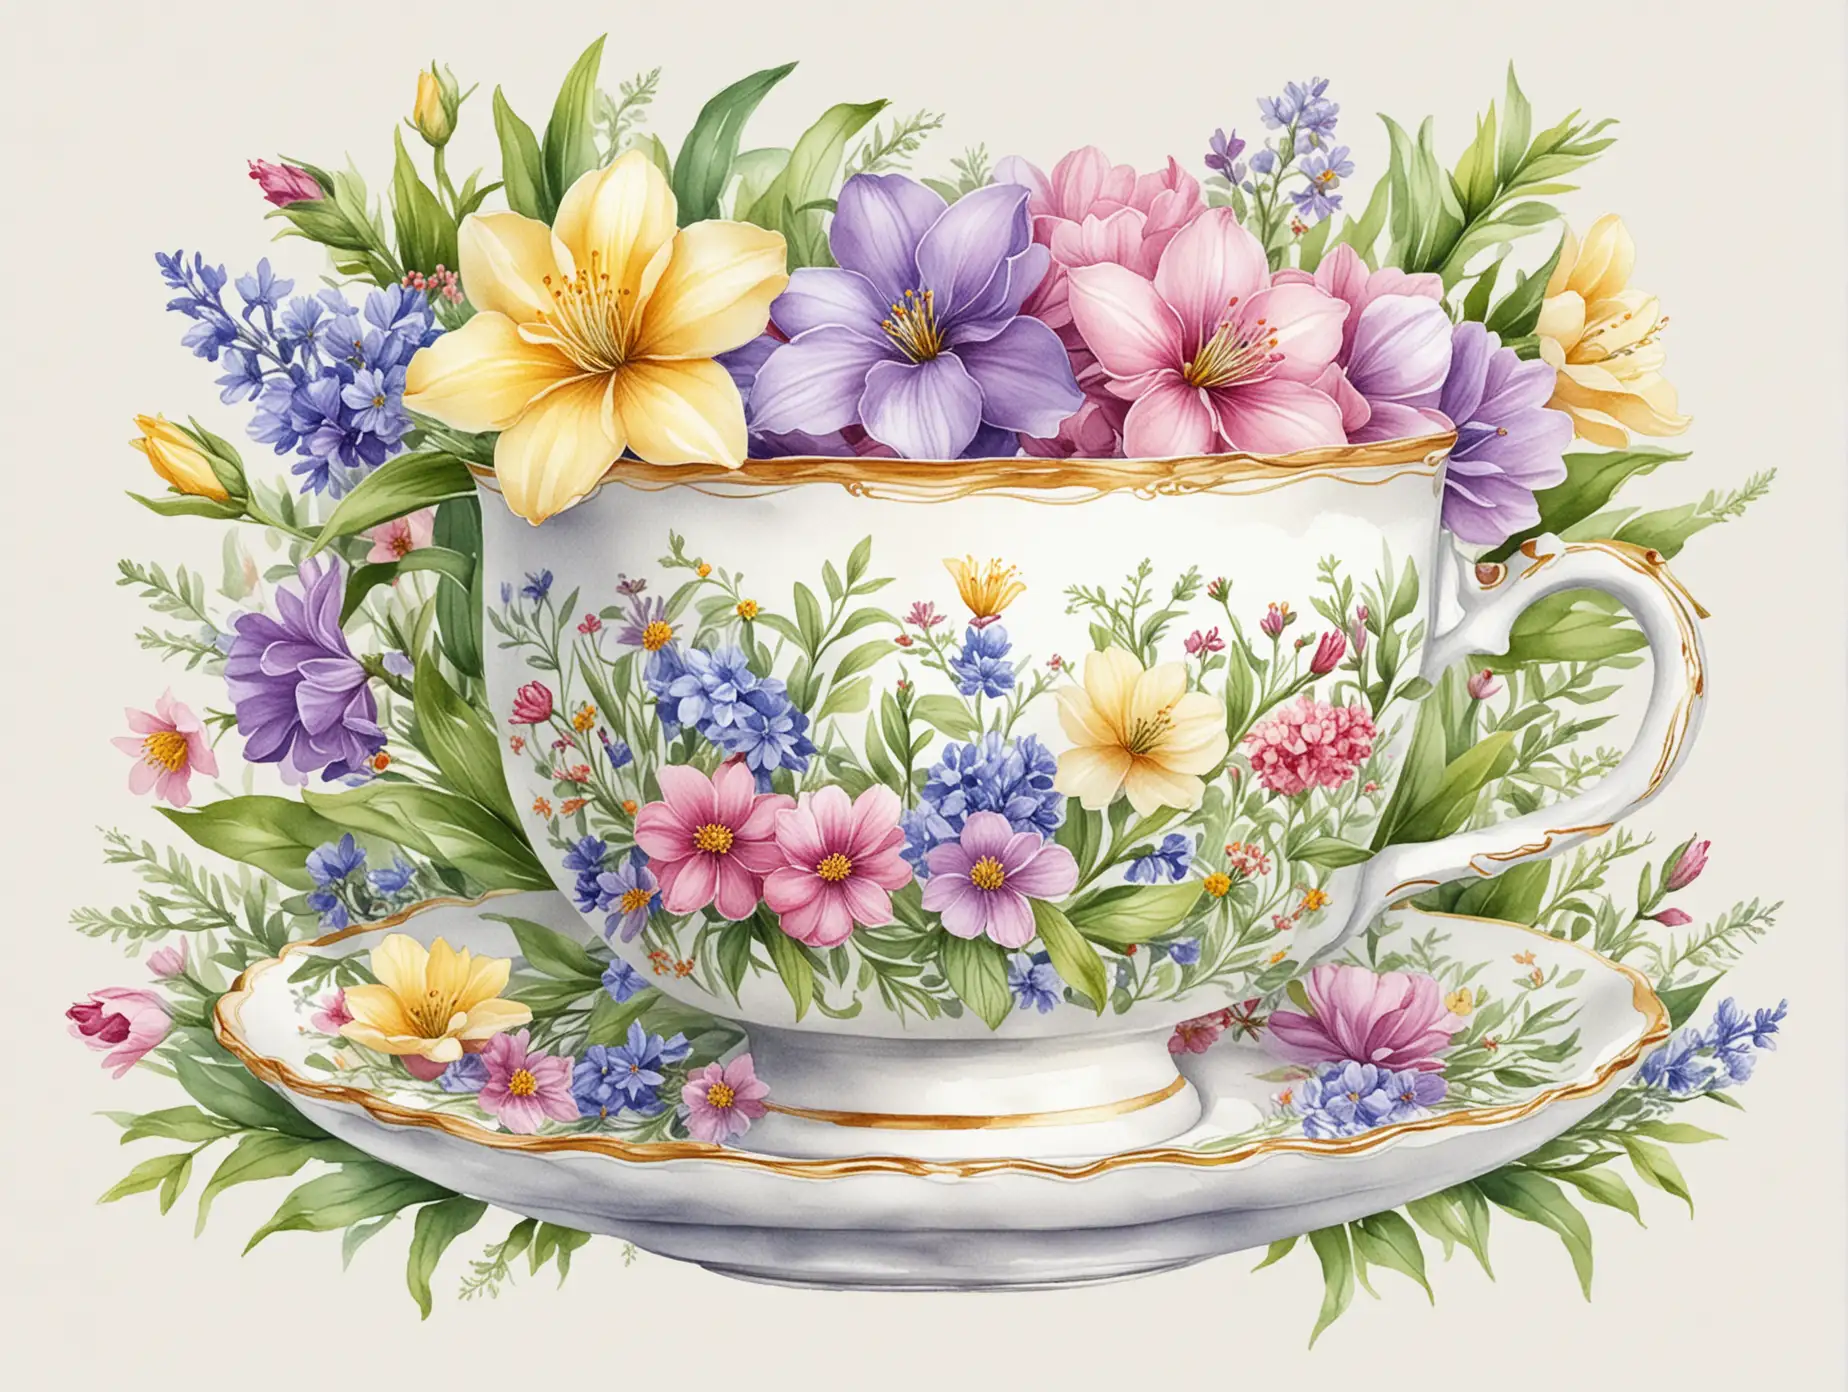 Elegant Tea Cup with Spring Flowers Clipart Illustration